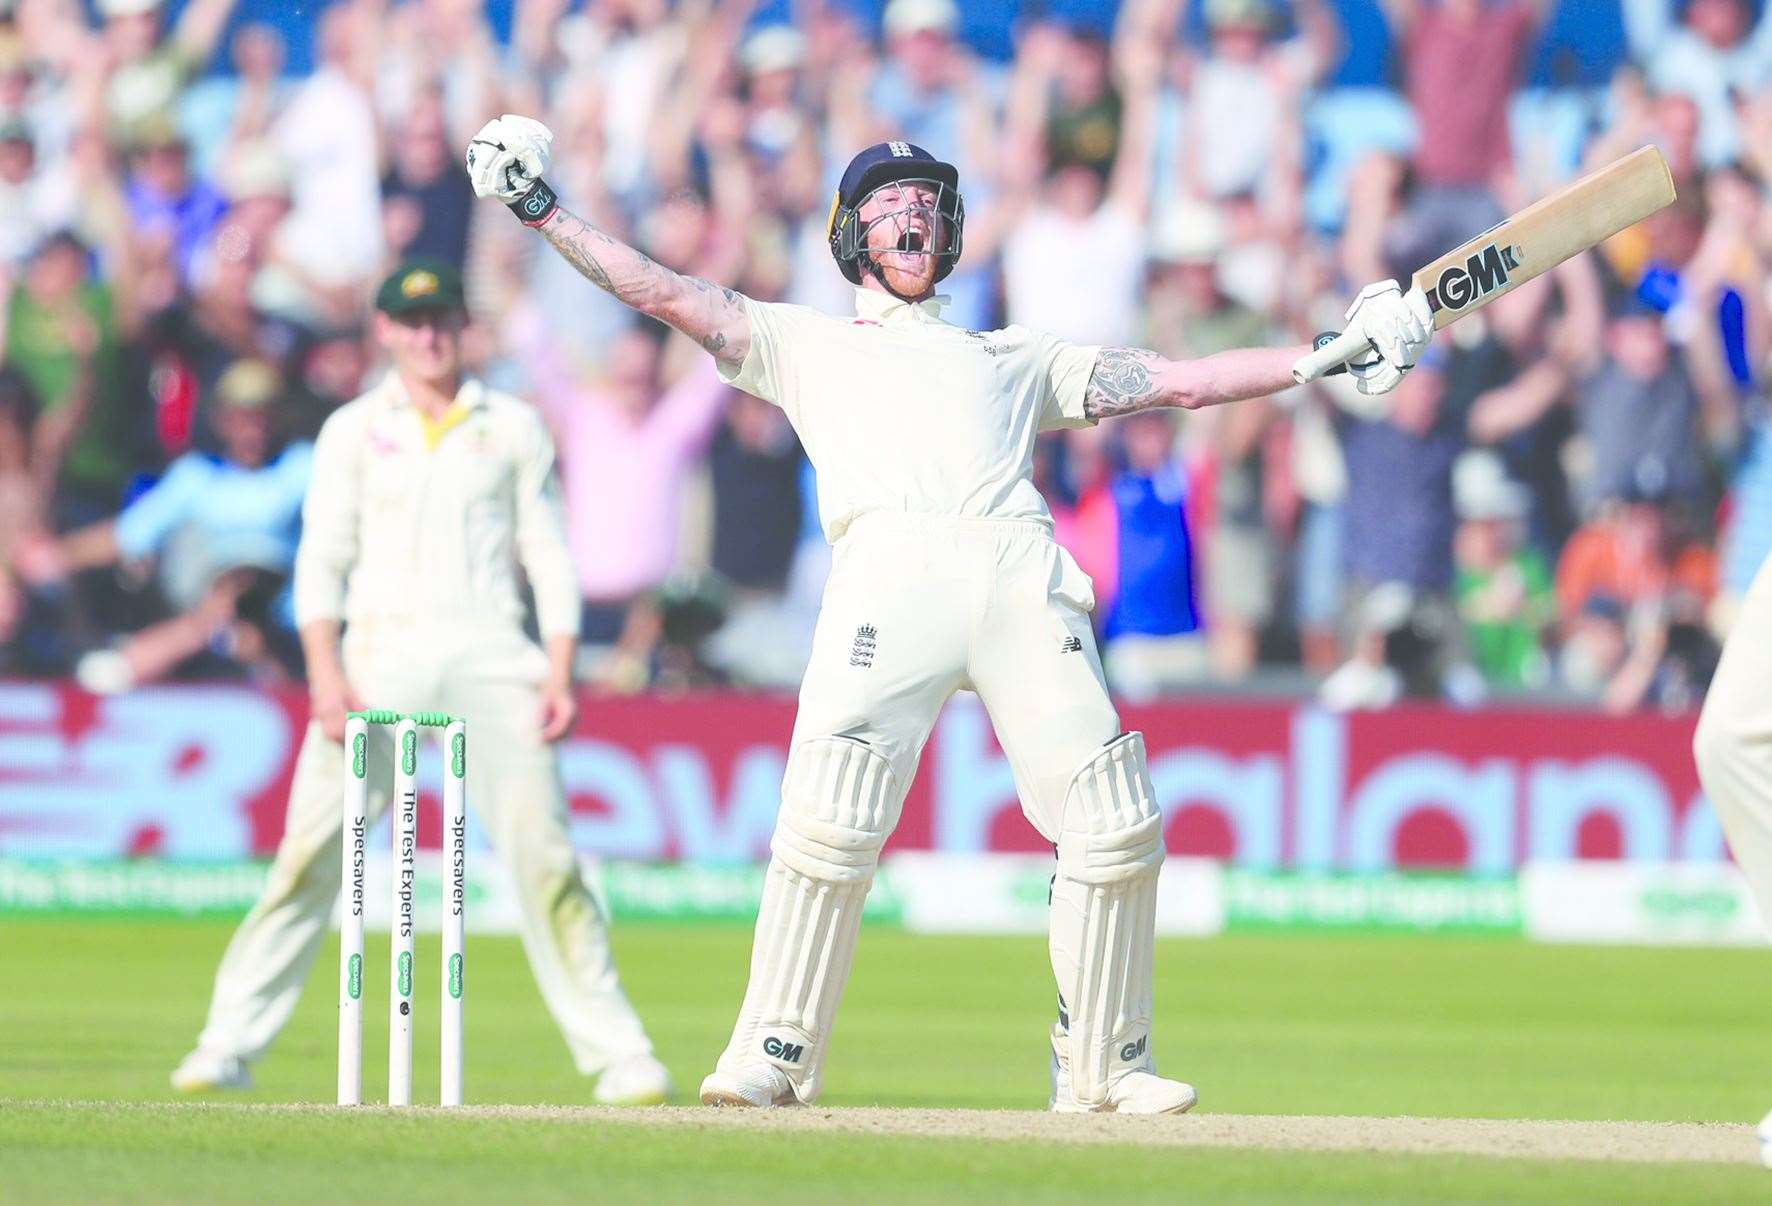 England's Ben Stokes is a hero of our times, writes Rhys Griffiths